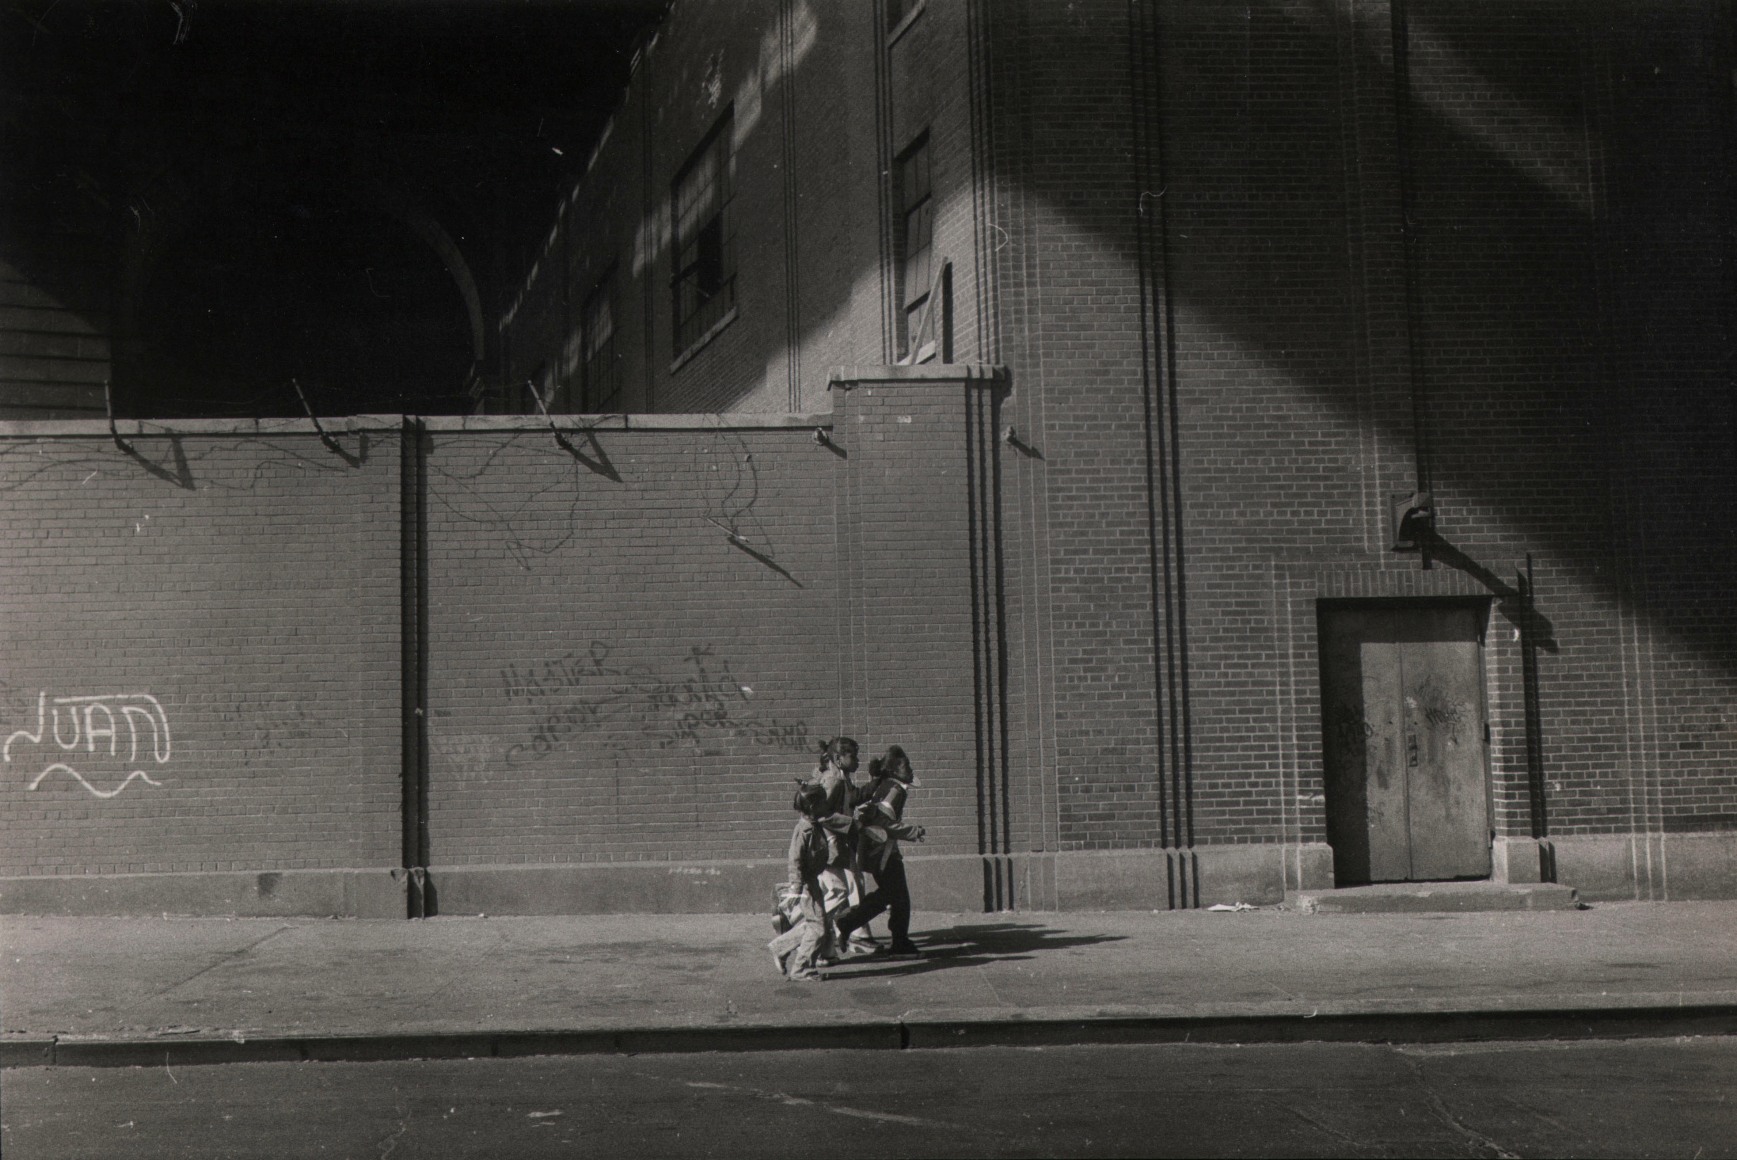 30.&nbsp;Anthony Barboza (African-American, b. 1944), NYC, c. 1970s